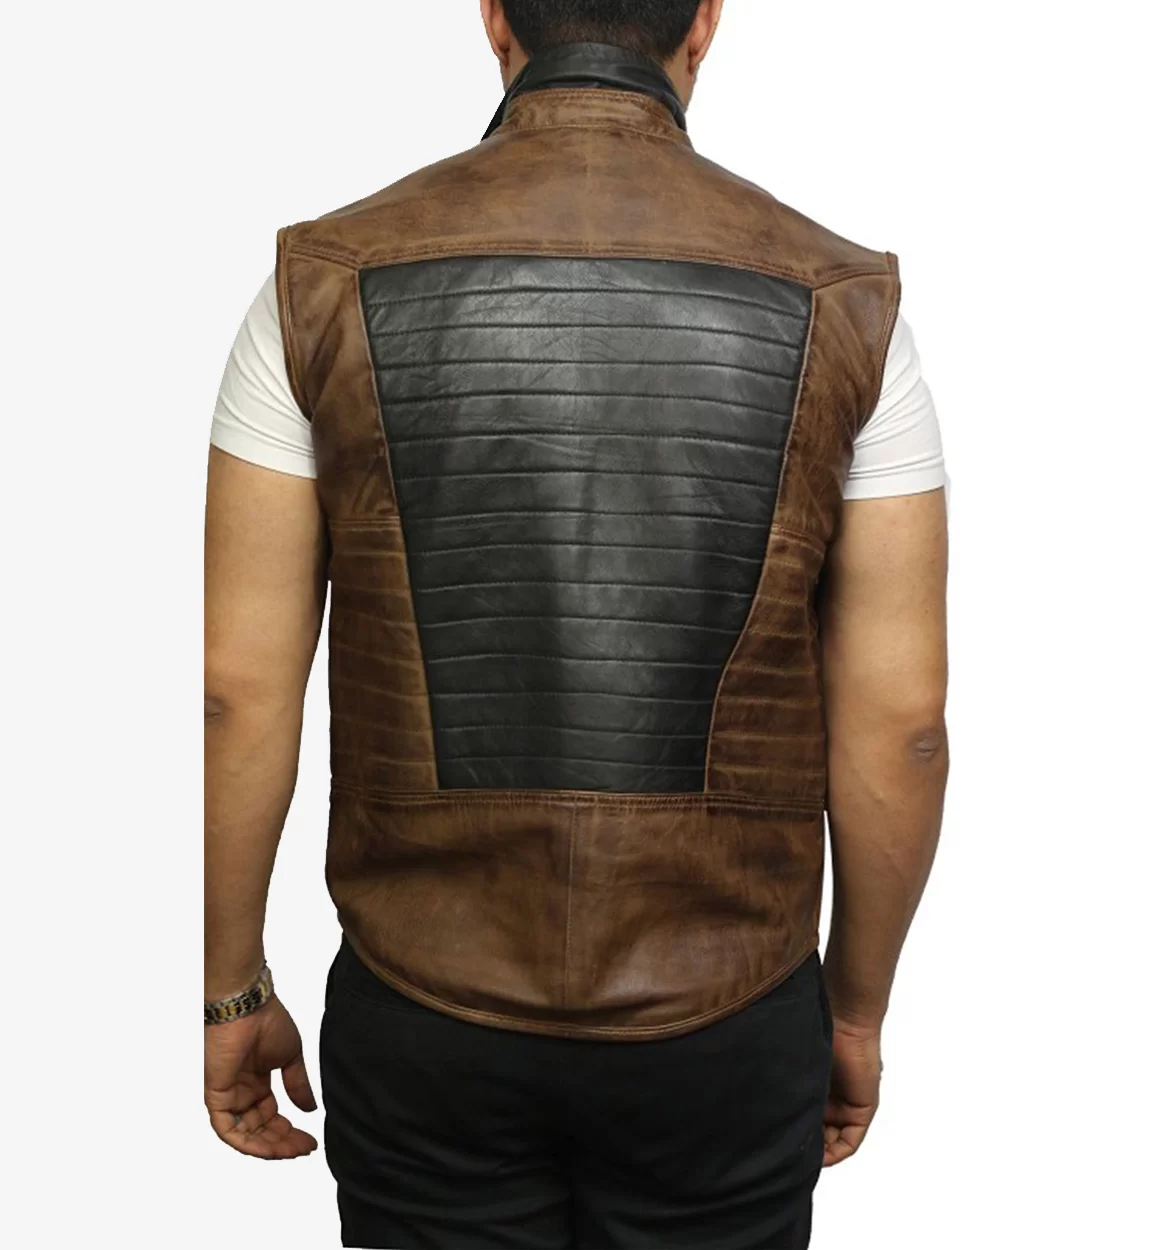 Mens-Body-Warmer-Black-and-Brown-Real-Leather-Vest1.webp